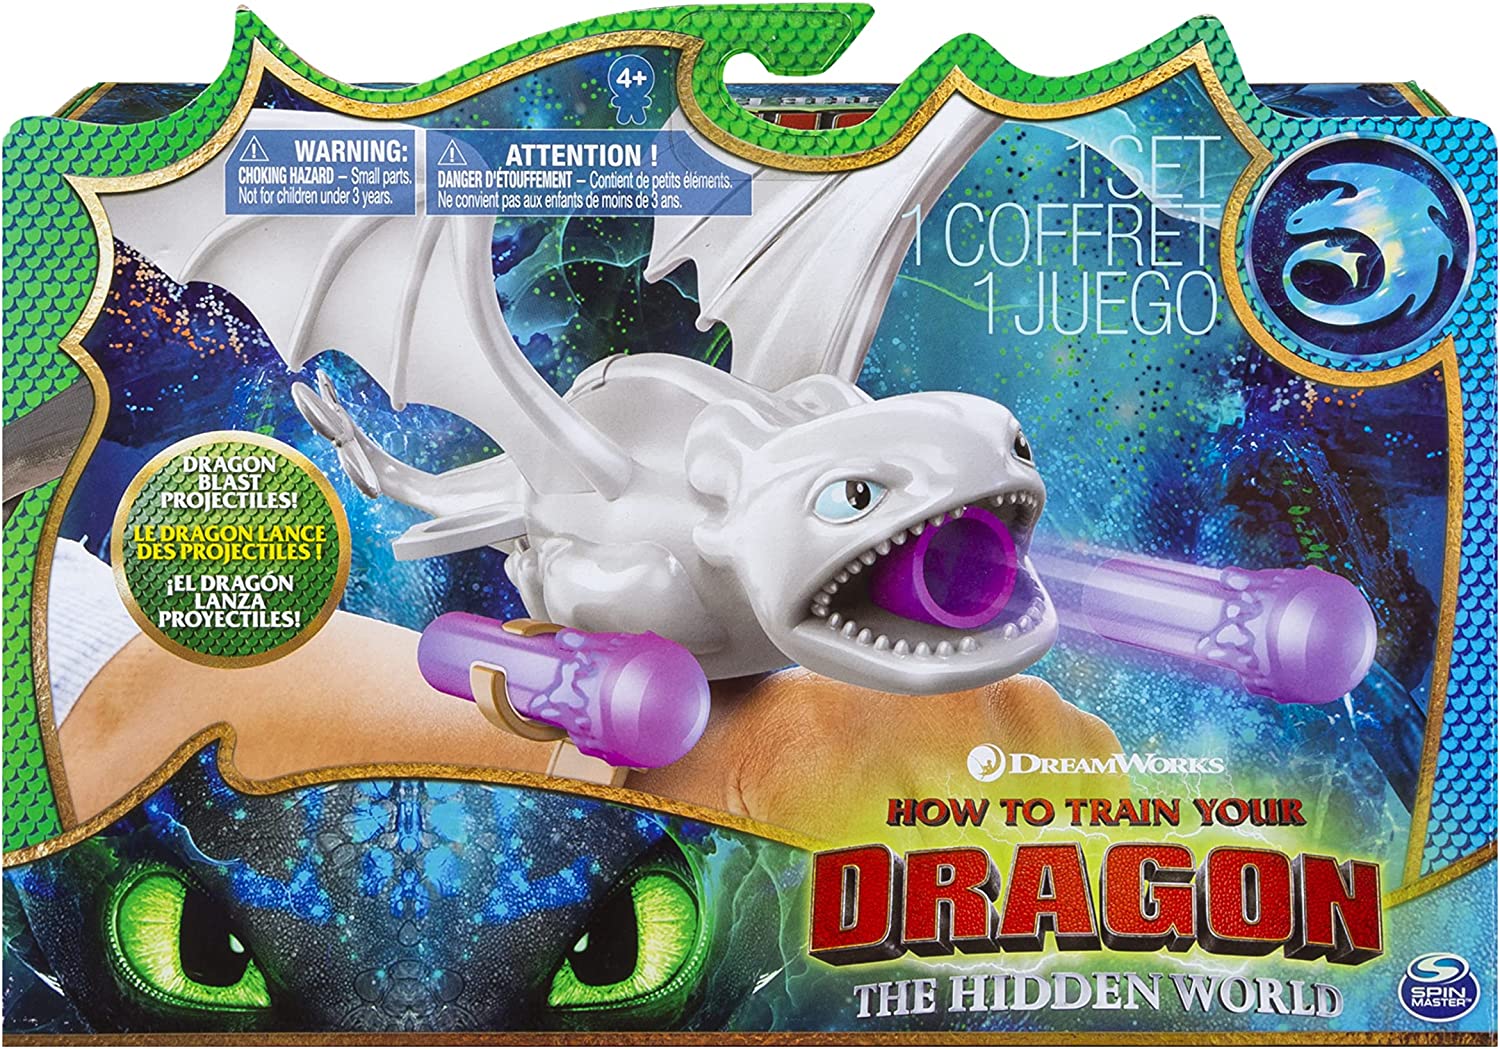 Dreamworks How To Train Your Dragon Lightfury Wrist Launcher Toy $4 + Free Shipping w/ Amazon Prime or on $25+